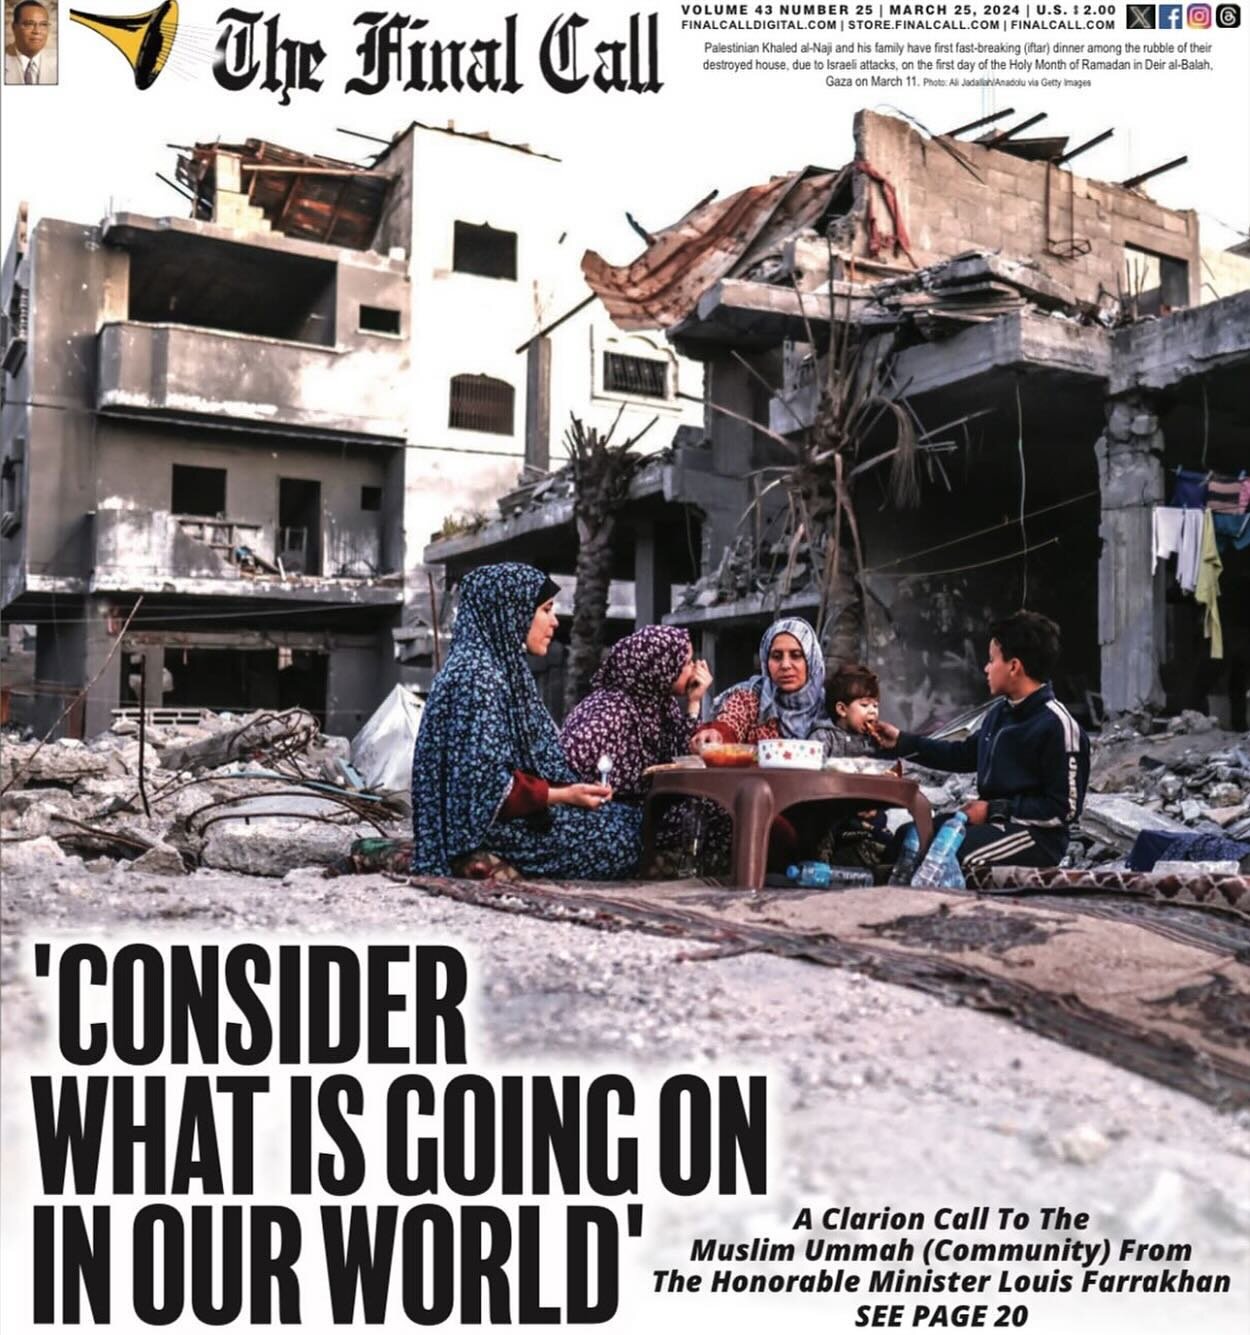 &lsquo;Consider What is Going On in Our World&rsquo; 🎺

A Clarion Call To The Muslim Ummah (Community) From The Honorable Minister Louis Farrakhan. 

See Page 20

Get your latest copy of the Final Call Newspaper ‼️

Subscribe to the digital version 